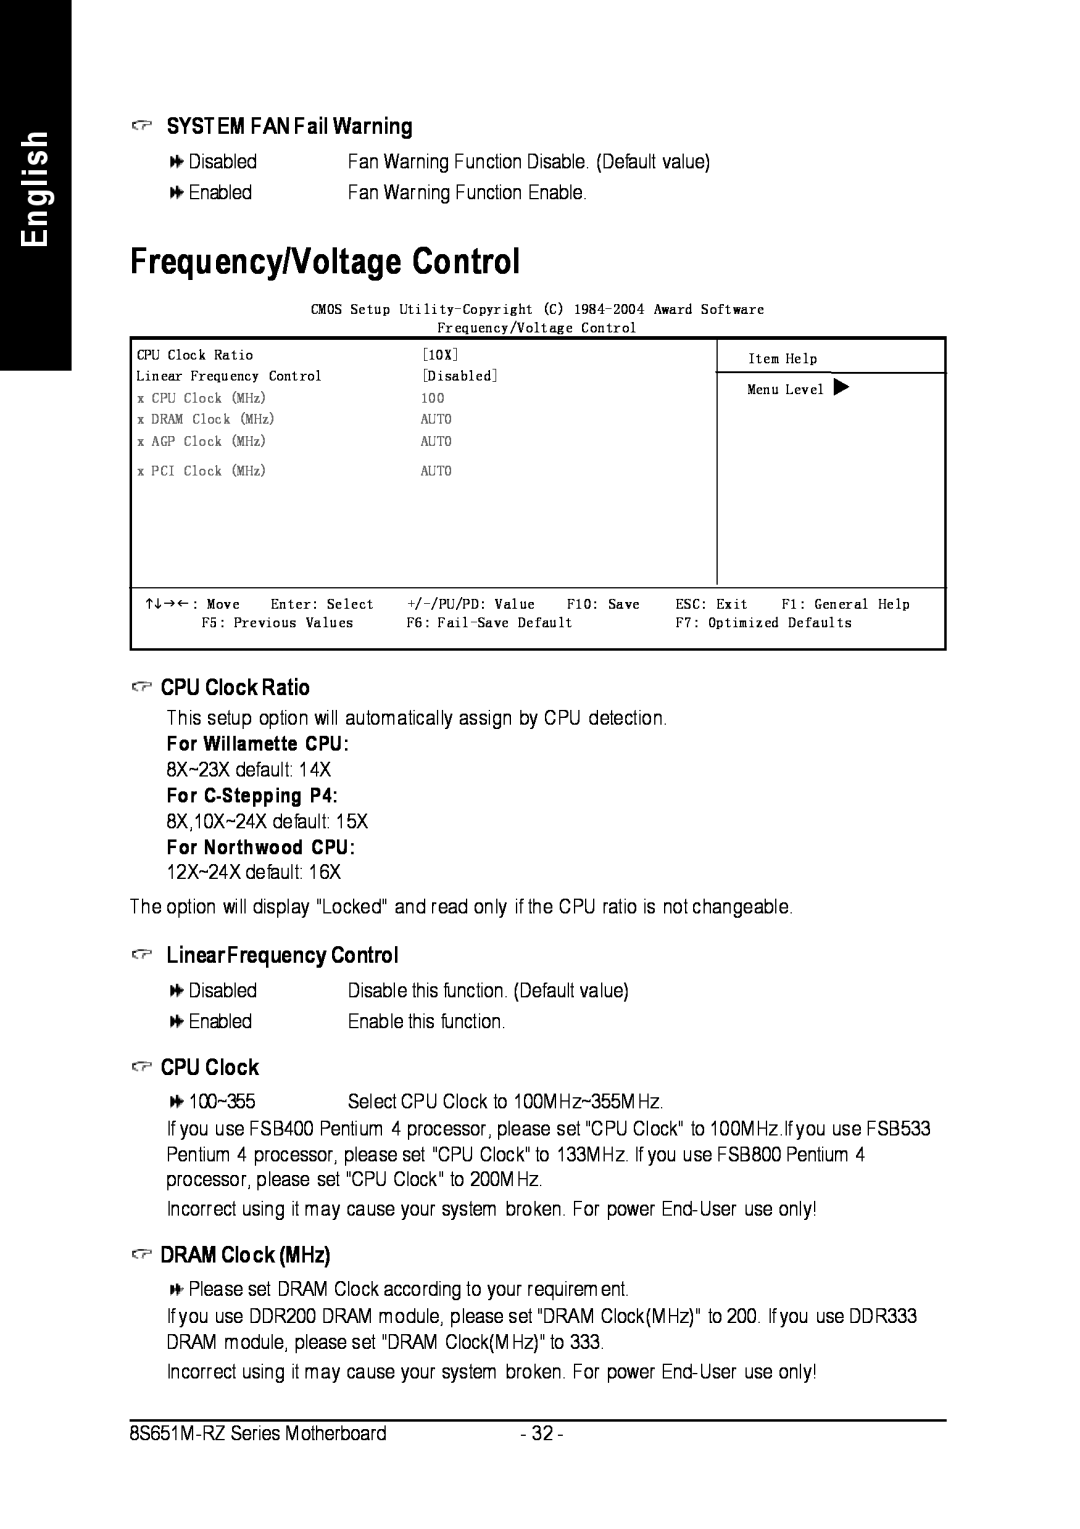 Intel 8S651M-RZ-C Frequency/Voltage Control, English, SYSTEM FAN Fail Warning, CPU Clock Ratio, Linear Frequency Control 